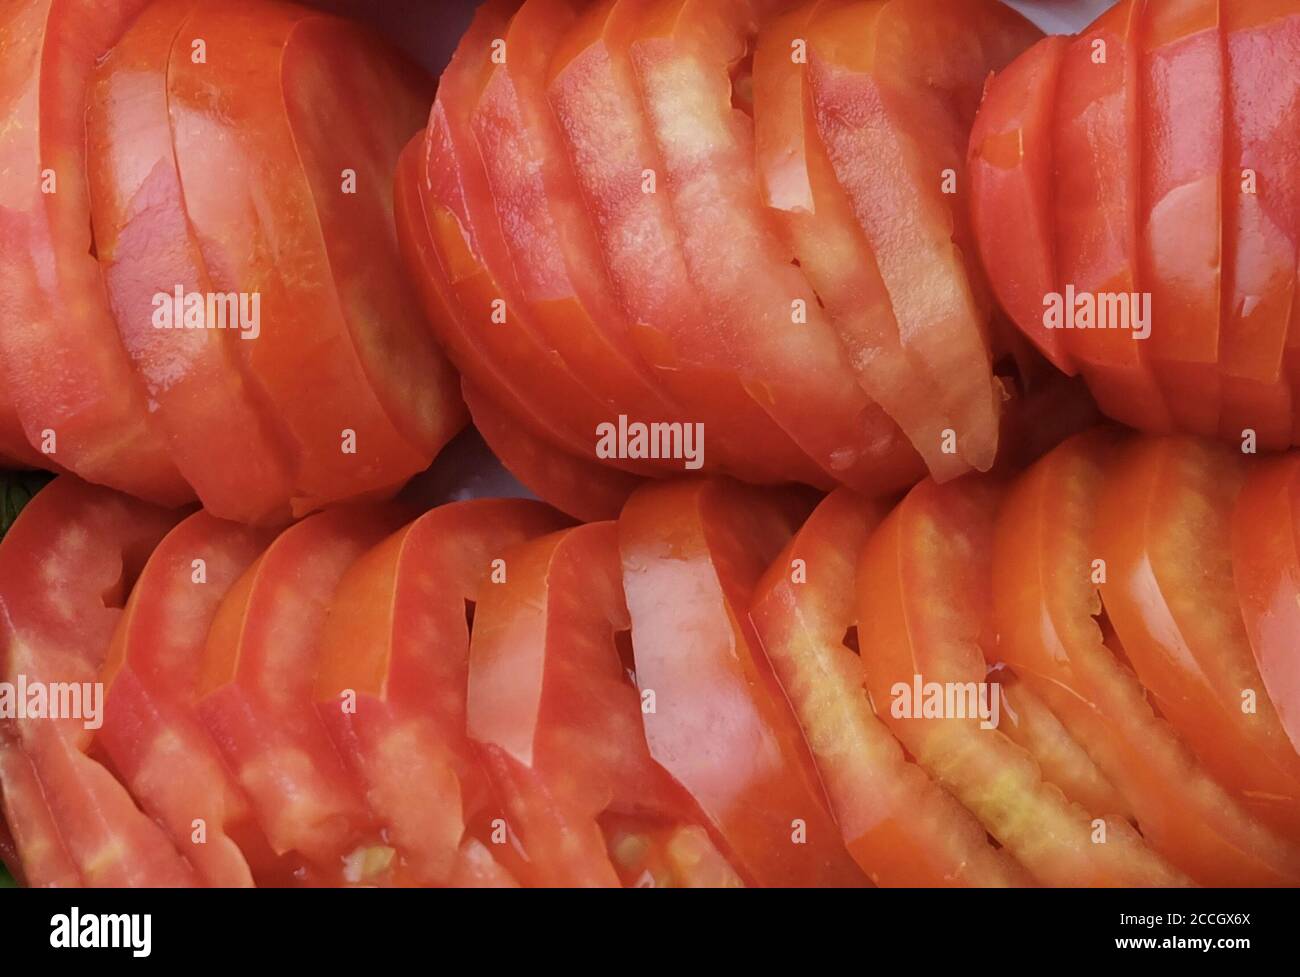 Vegetable, Close Up of Fresh Ripe Sliced Red Tomatoes. High in Vitamin C and A. Stock Photo